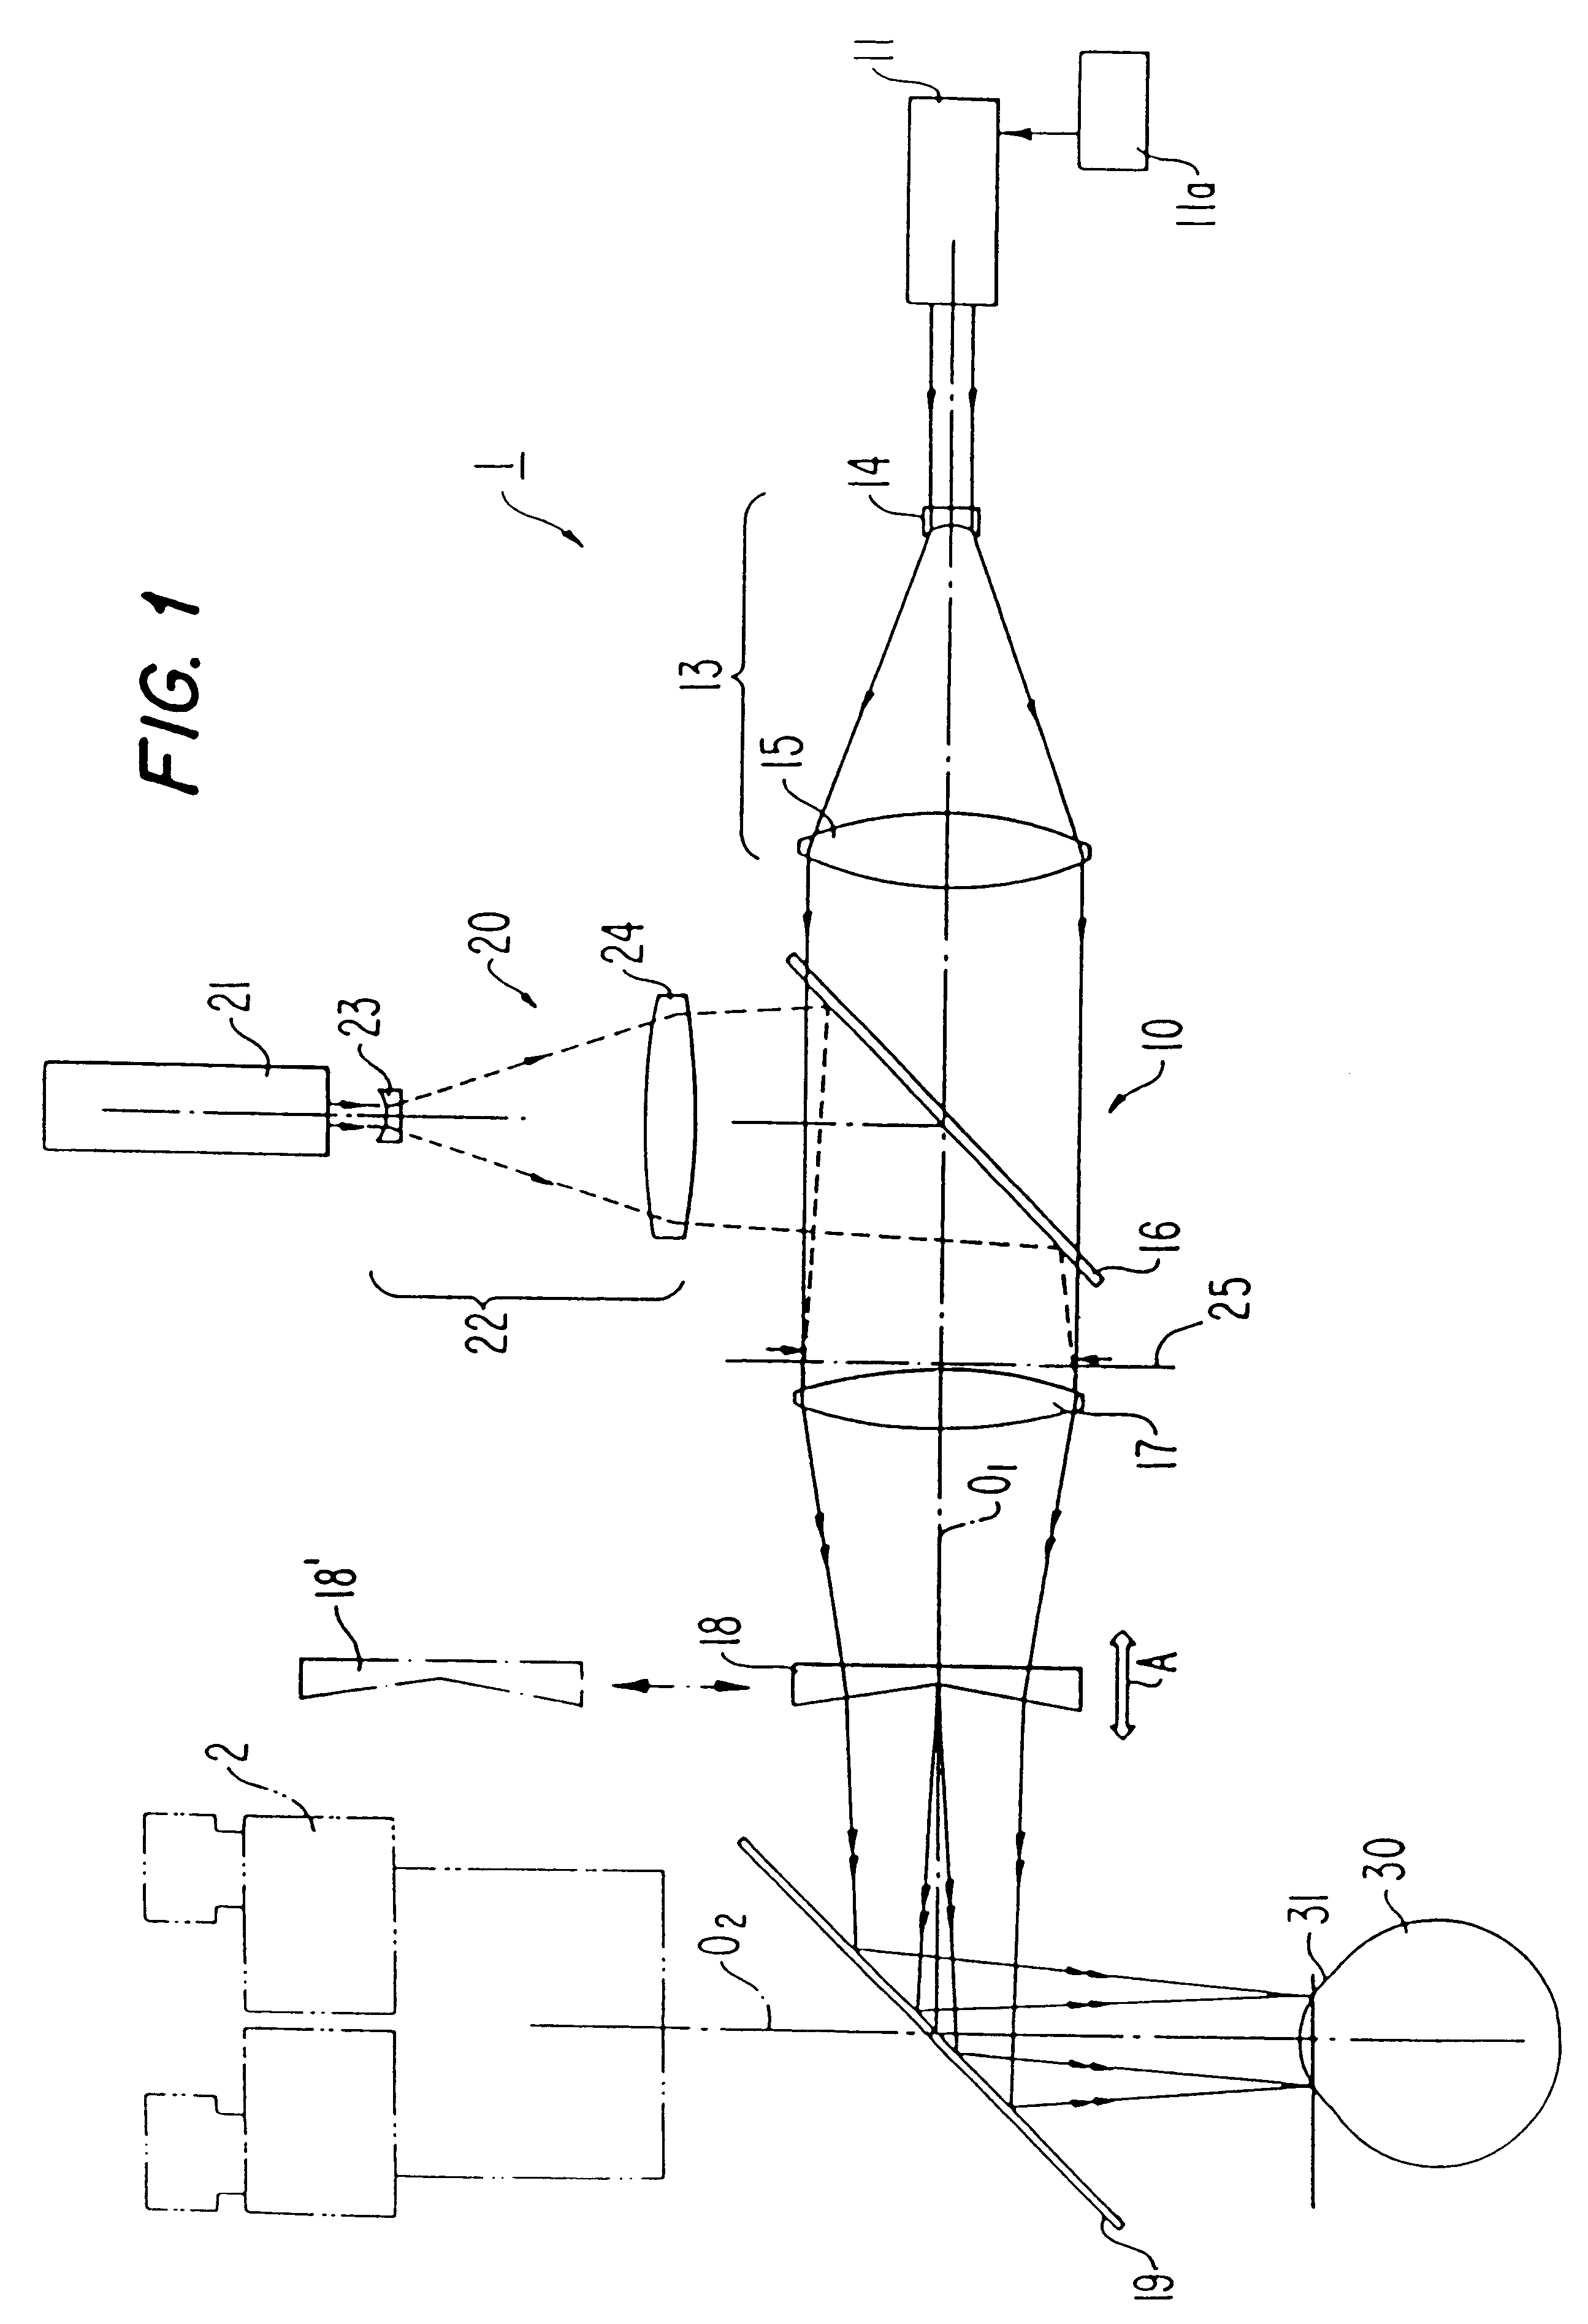 Noncontact laser microsurgical method